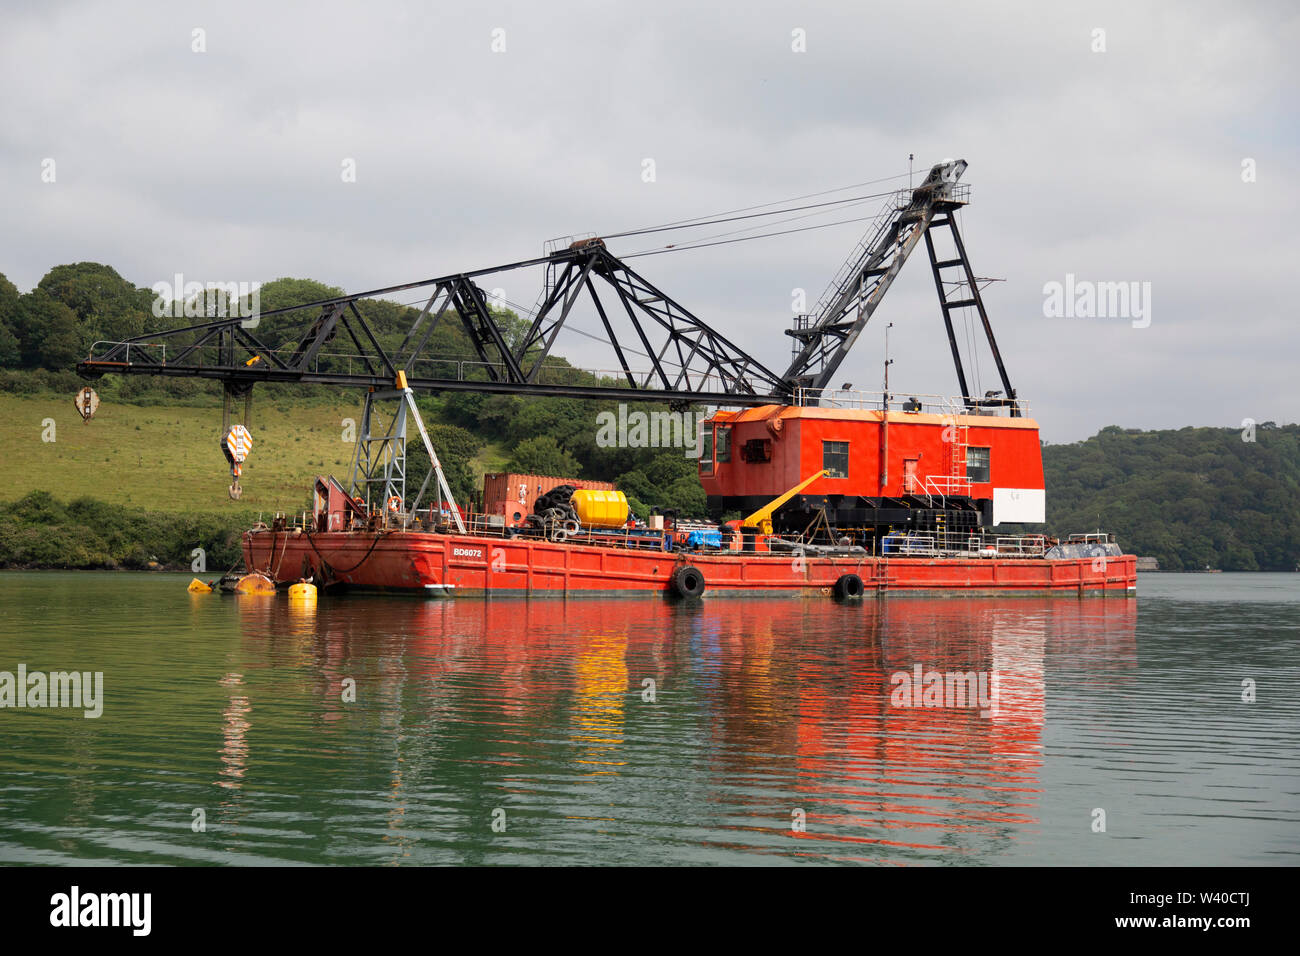 A Heavy Lift Crane Barge, number BD6072, owned by Keynvor Morlift, in the estuary of the Fal River in Cornwall, England. Stock Photo